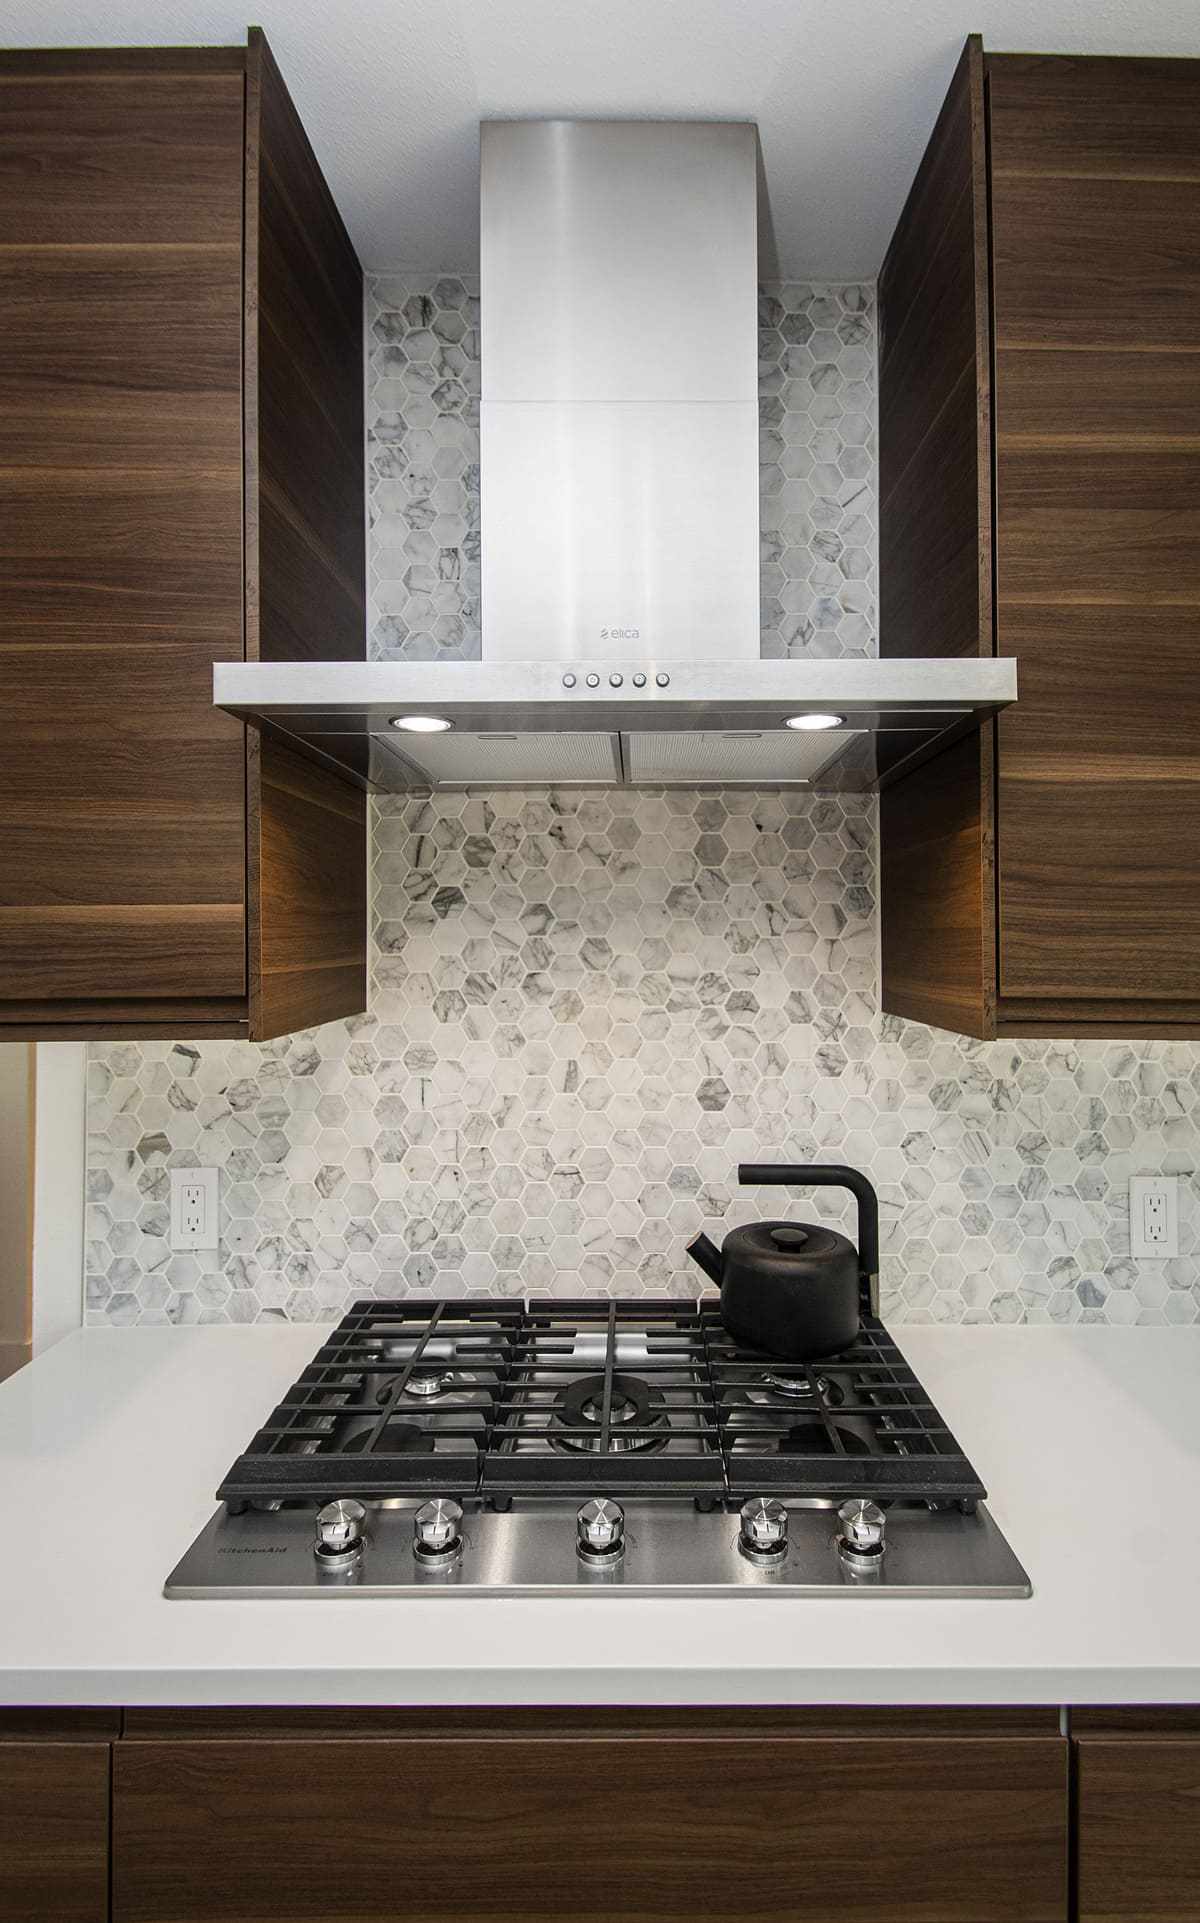 Stainless teel range hood above cook top in Dallas kitchen remodel by Sardone | McLain